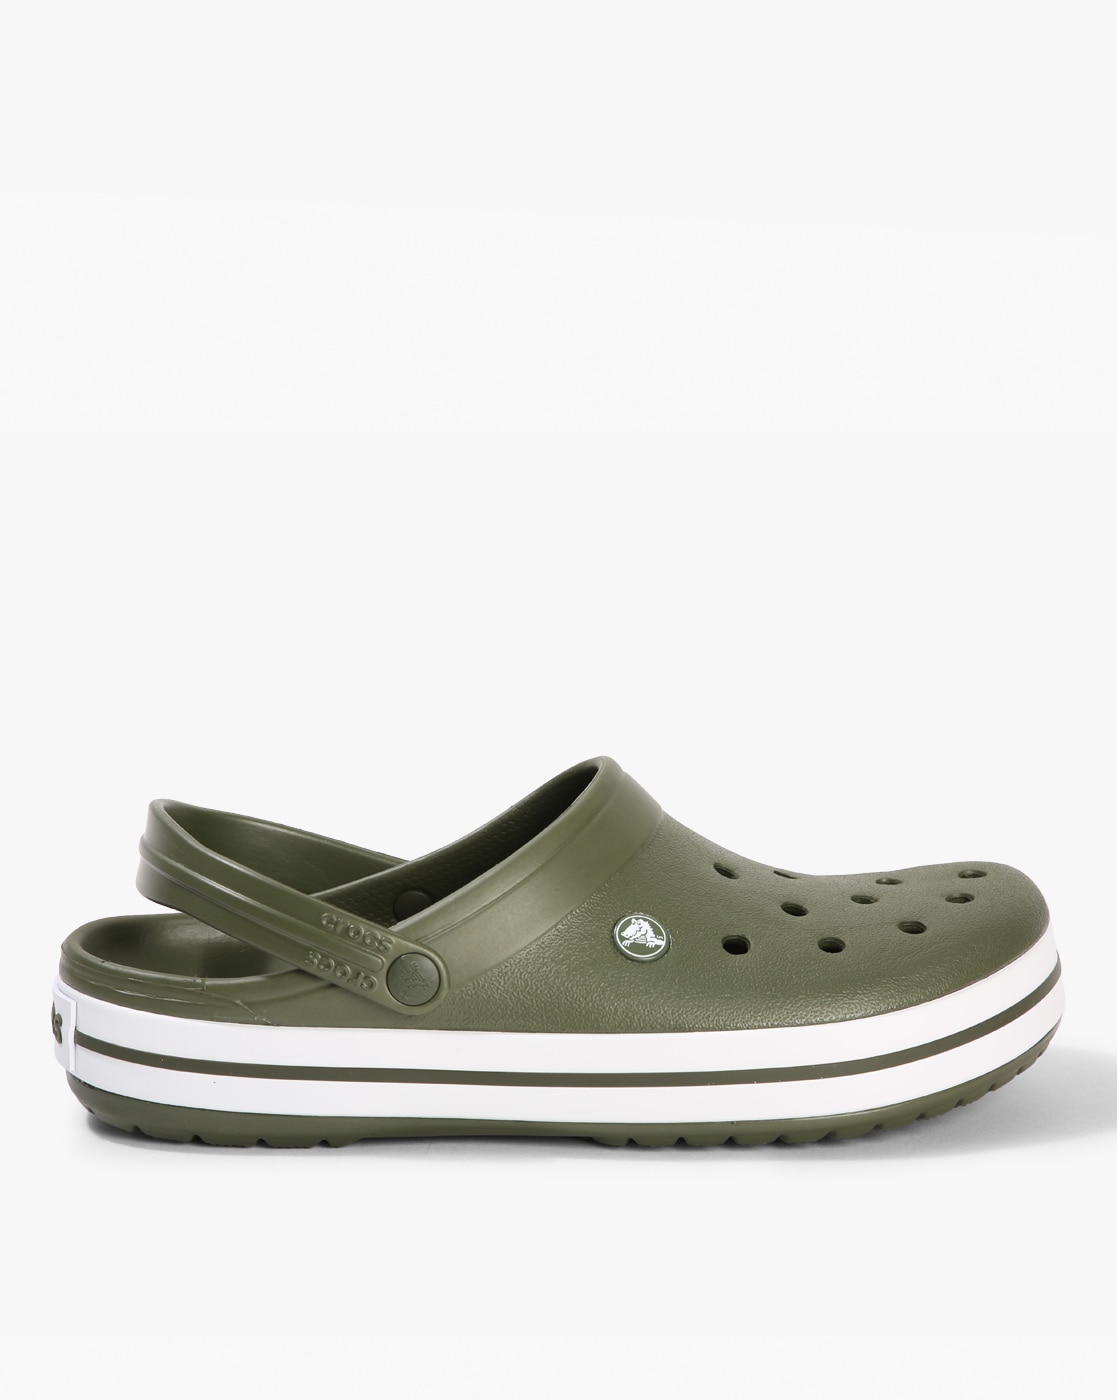 crocs slingback clogs with perforations